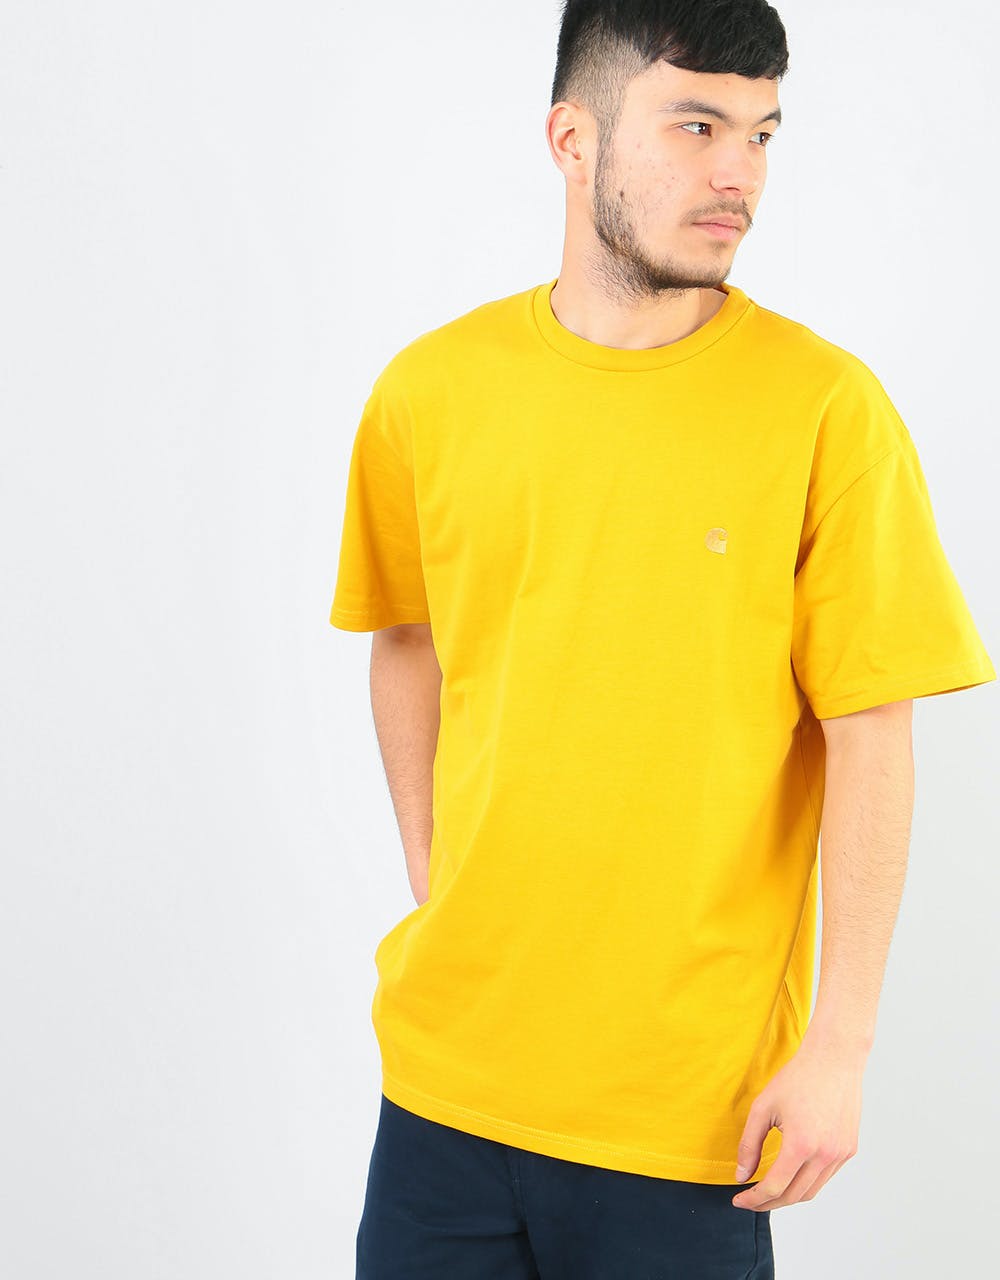 Carhartt WIP S/S Chase T-Shirt - Quince/Gold